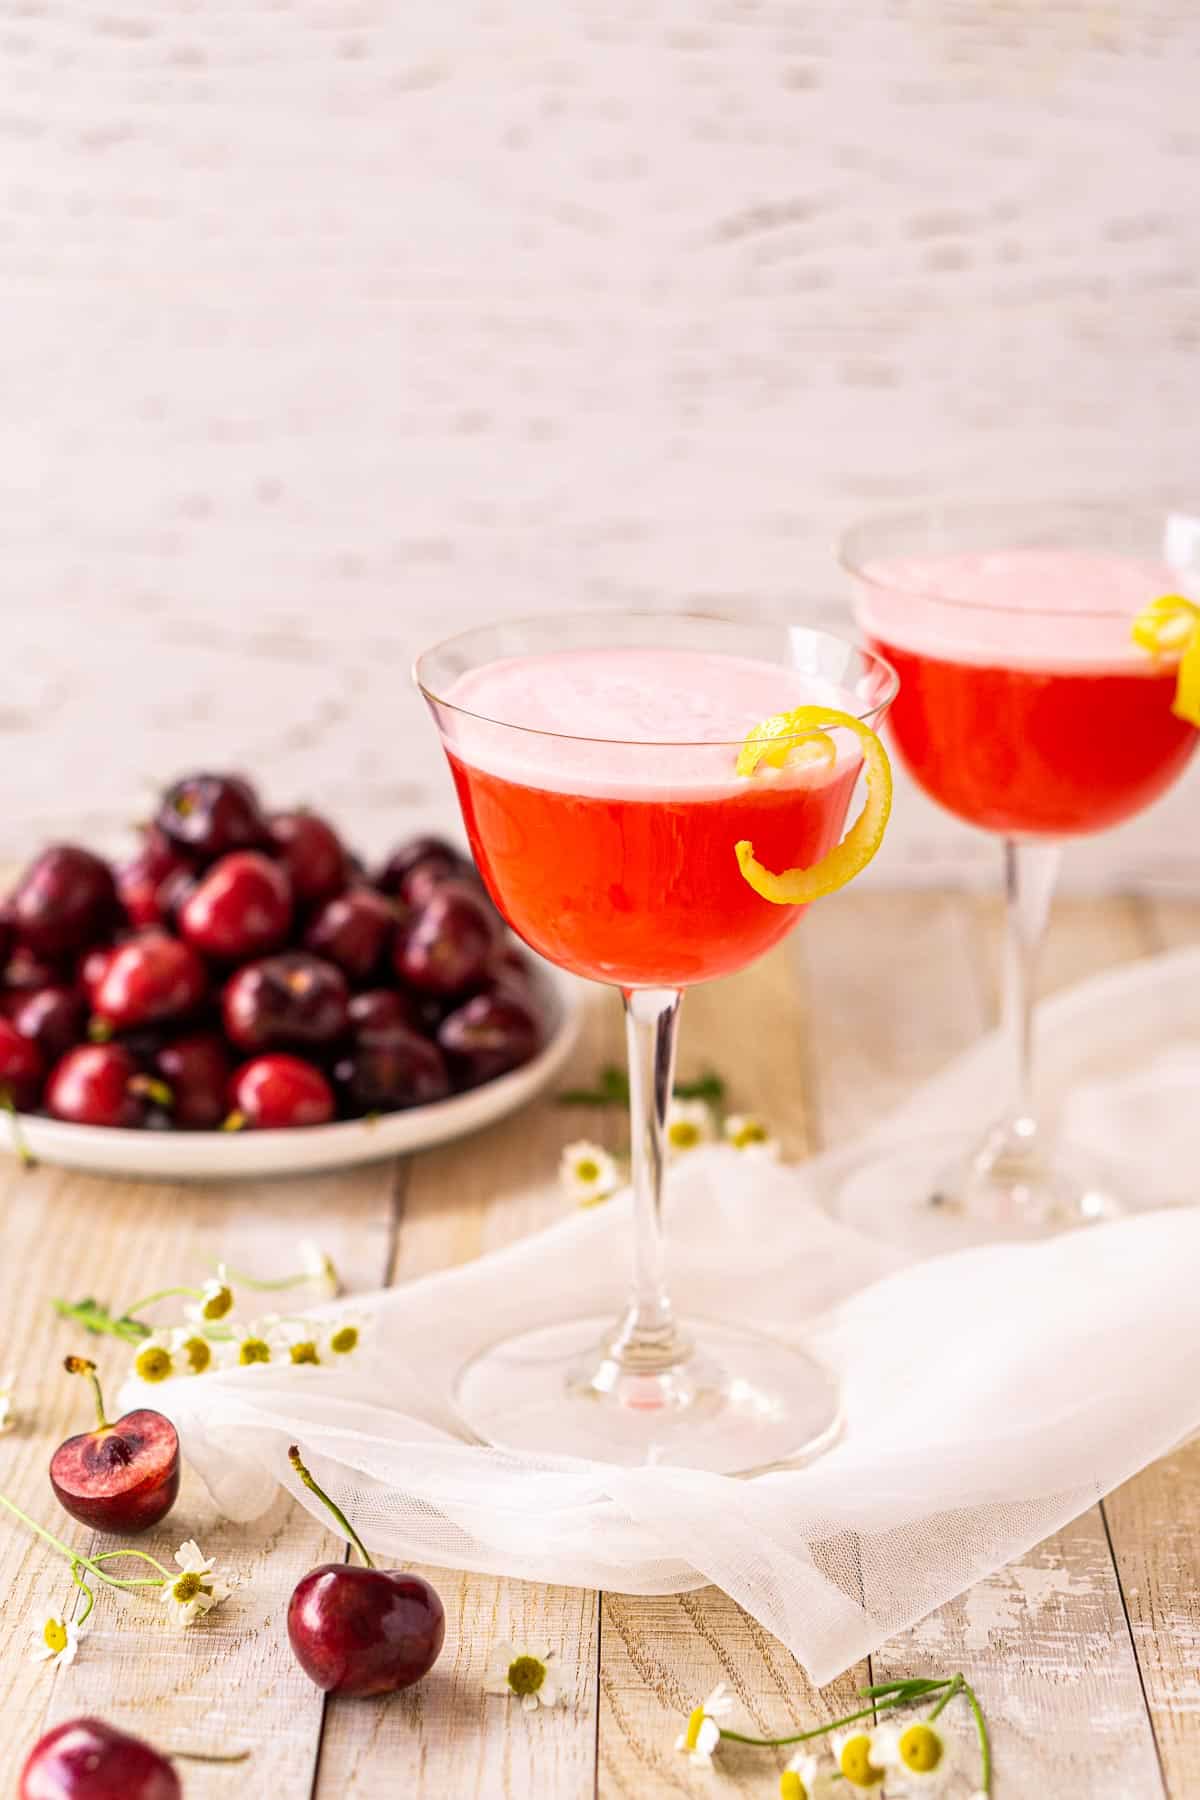 Two cherry vodka sour cocktails on white netting with white flowers and cherries around them.